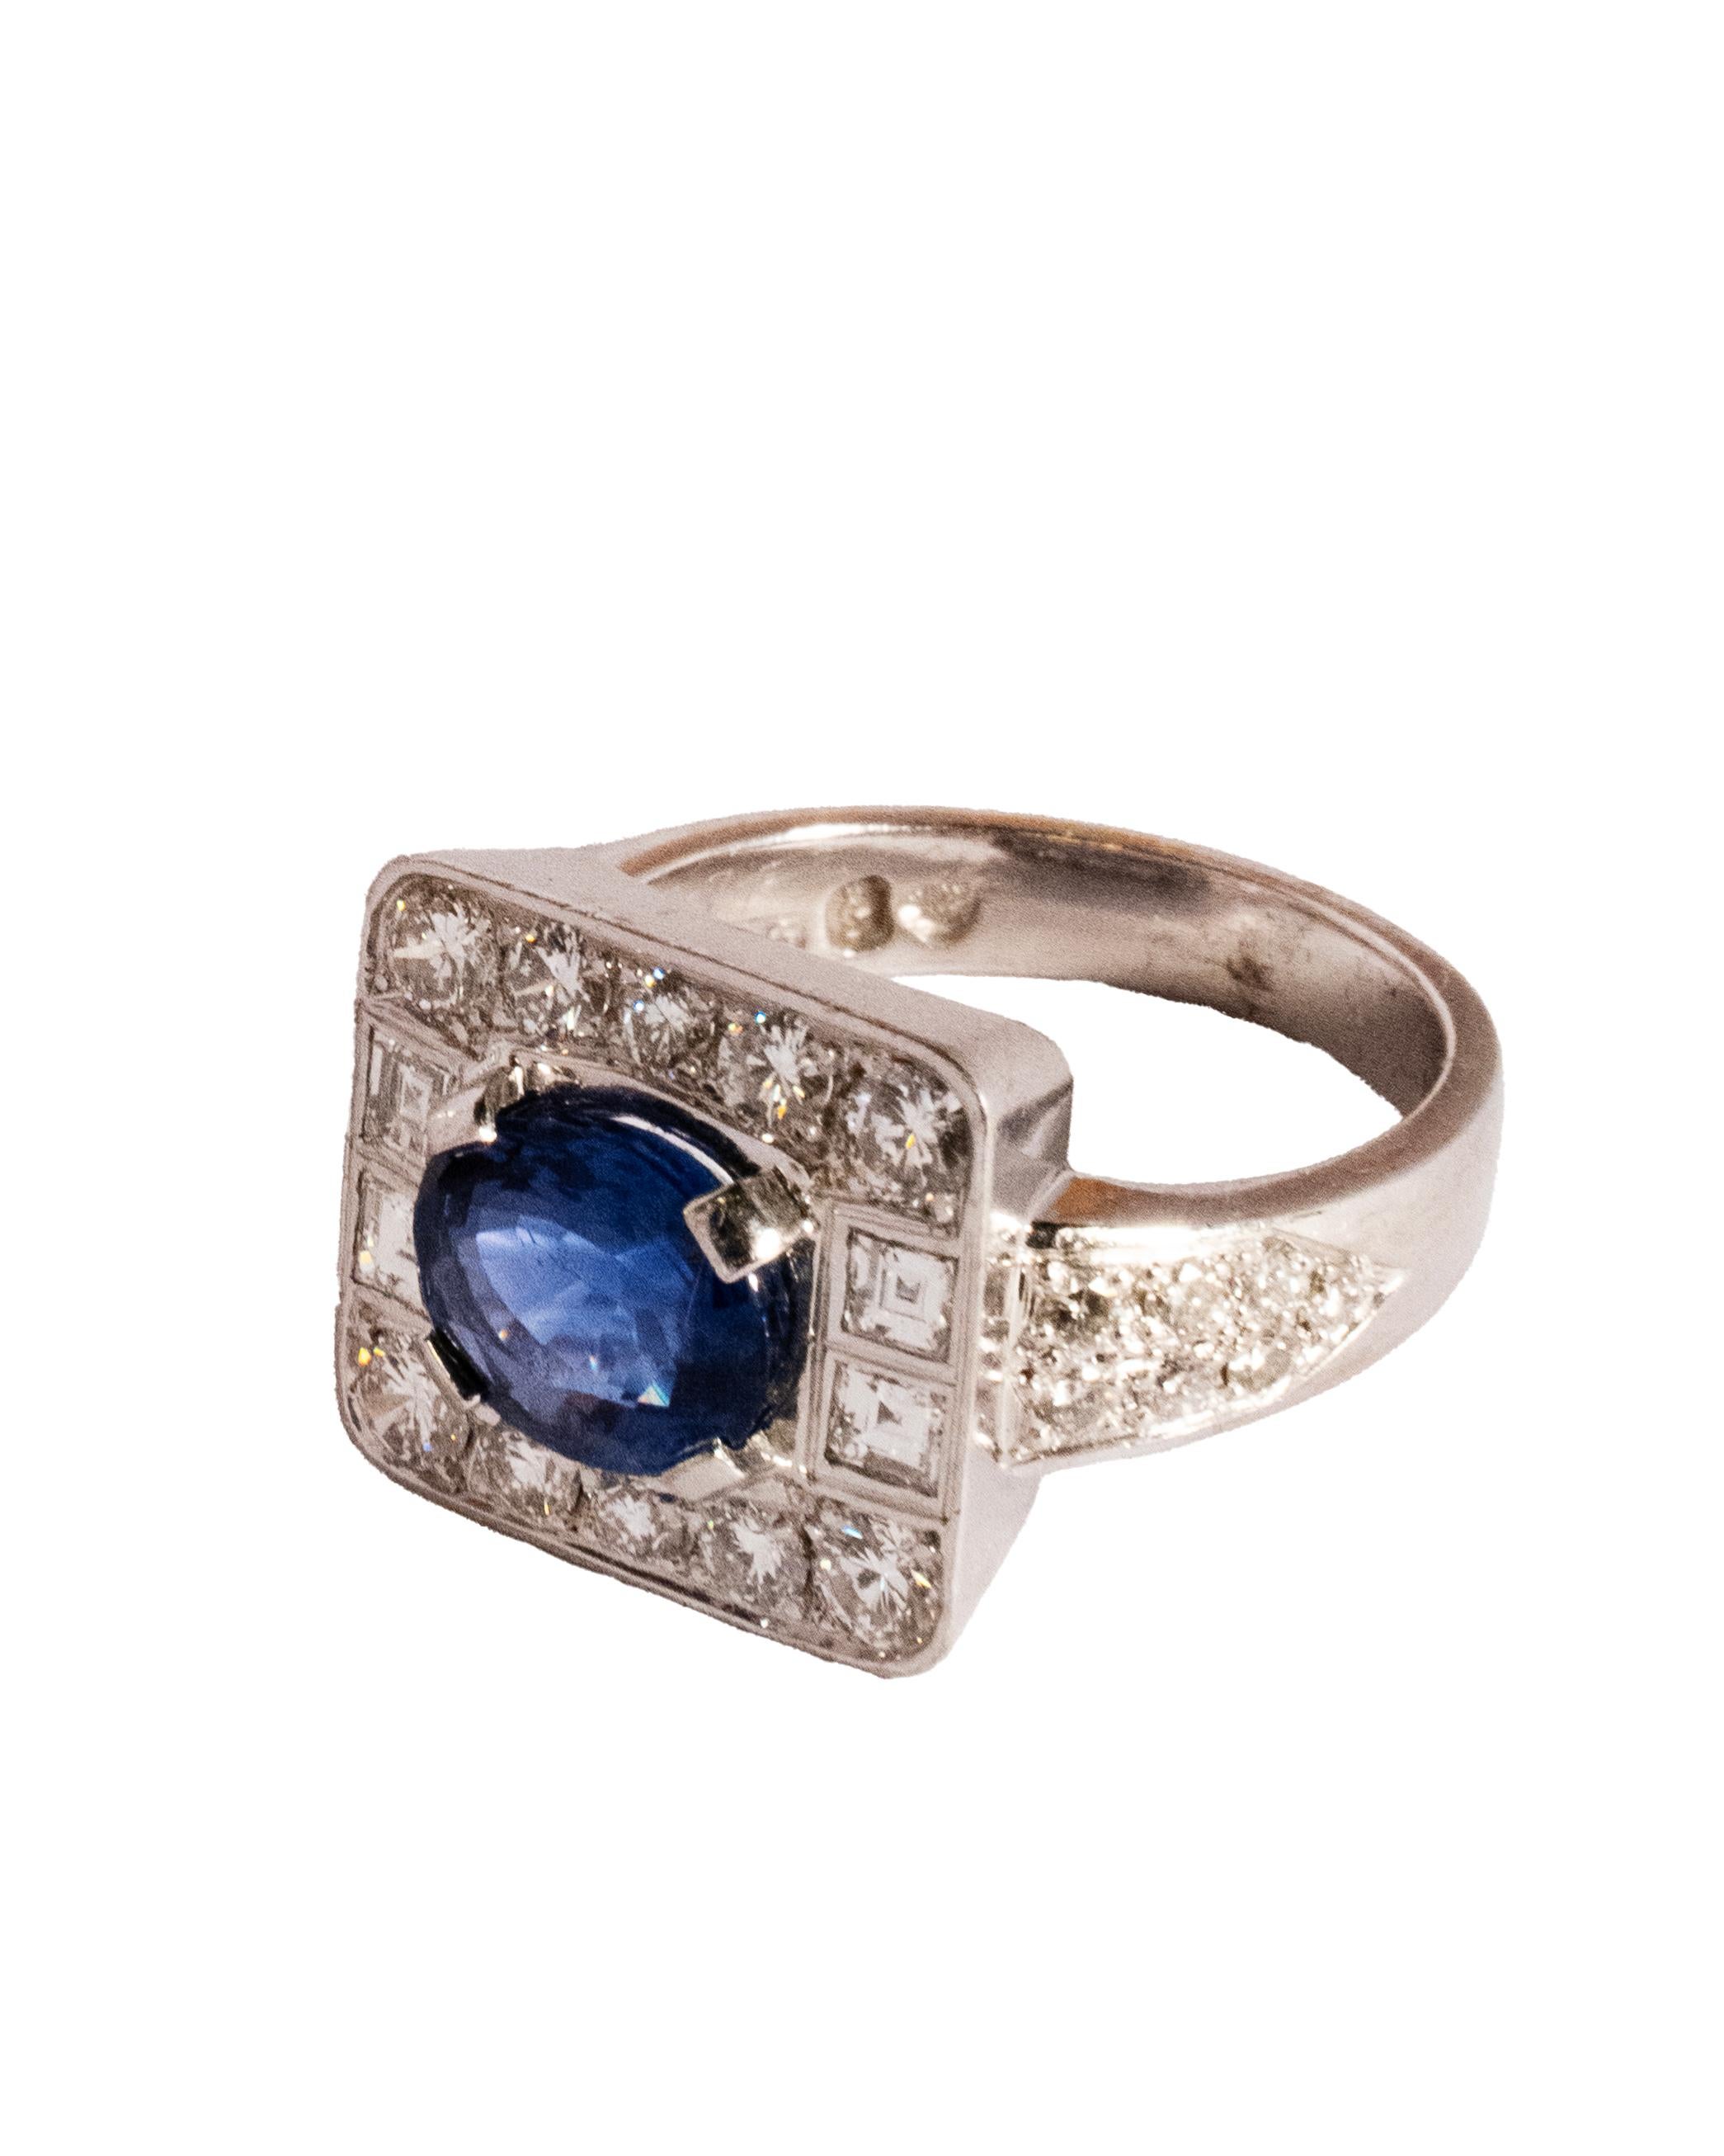 
Indulge in the vintage glamour of the Art Deco era with this exquisite Blue Sapphire Ring, a testament to elegance and sophistication. Crafted in Sweden during the 1980s, this ring captures the essence of Art Deco design with its striking features